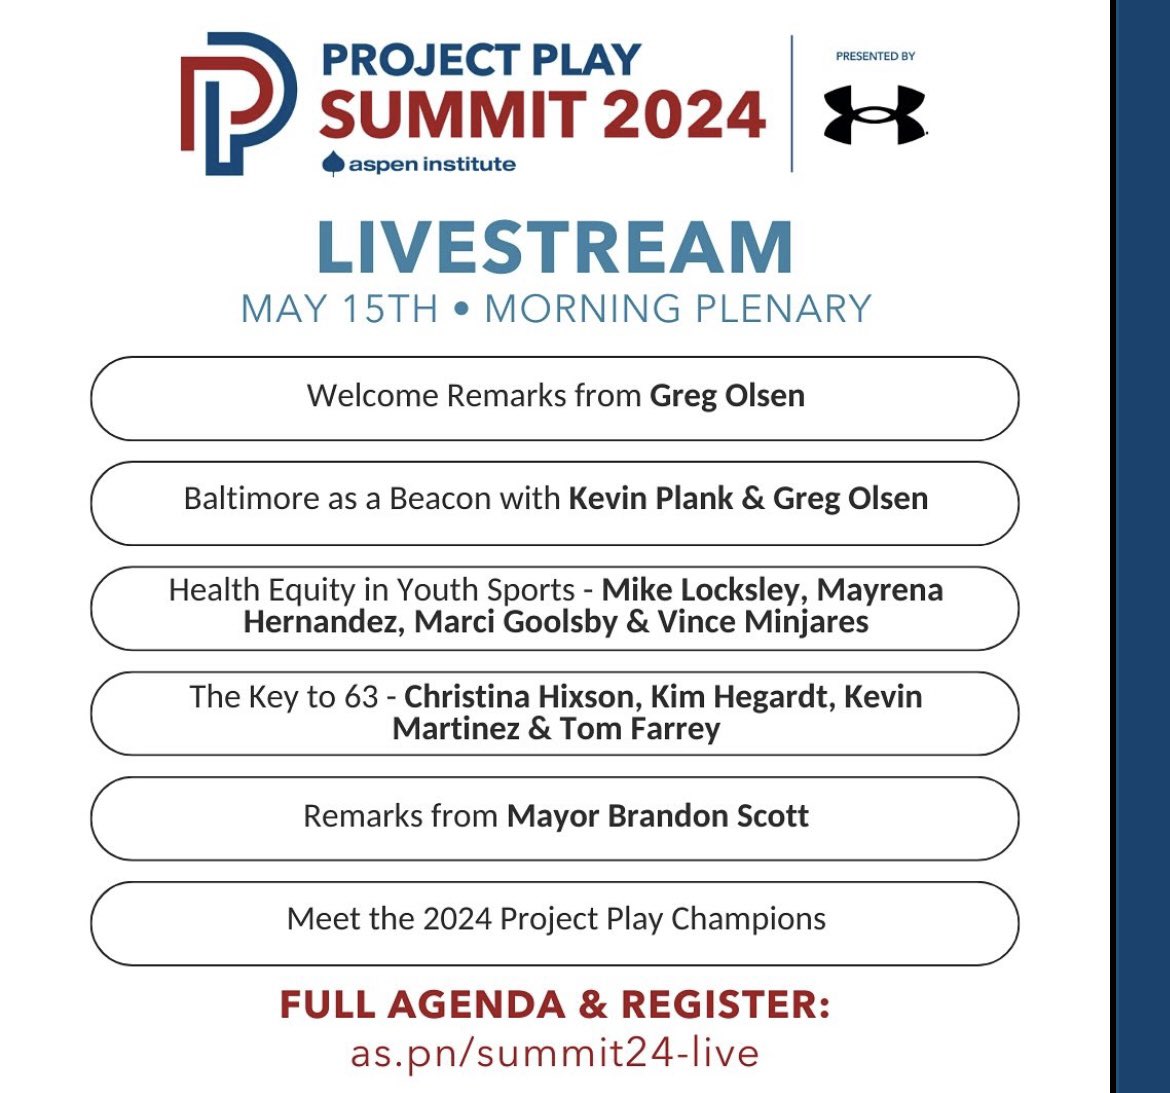 I am honored to be a panelist for the Healthy Equity in Youth Sports at the 2024 Project Play Summit! Tune in next week to watch our discussion! #projectplaysummit #aspenprojectplay #healthequity #youthsports #athletictraining #hapirlab